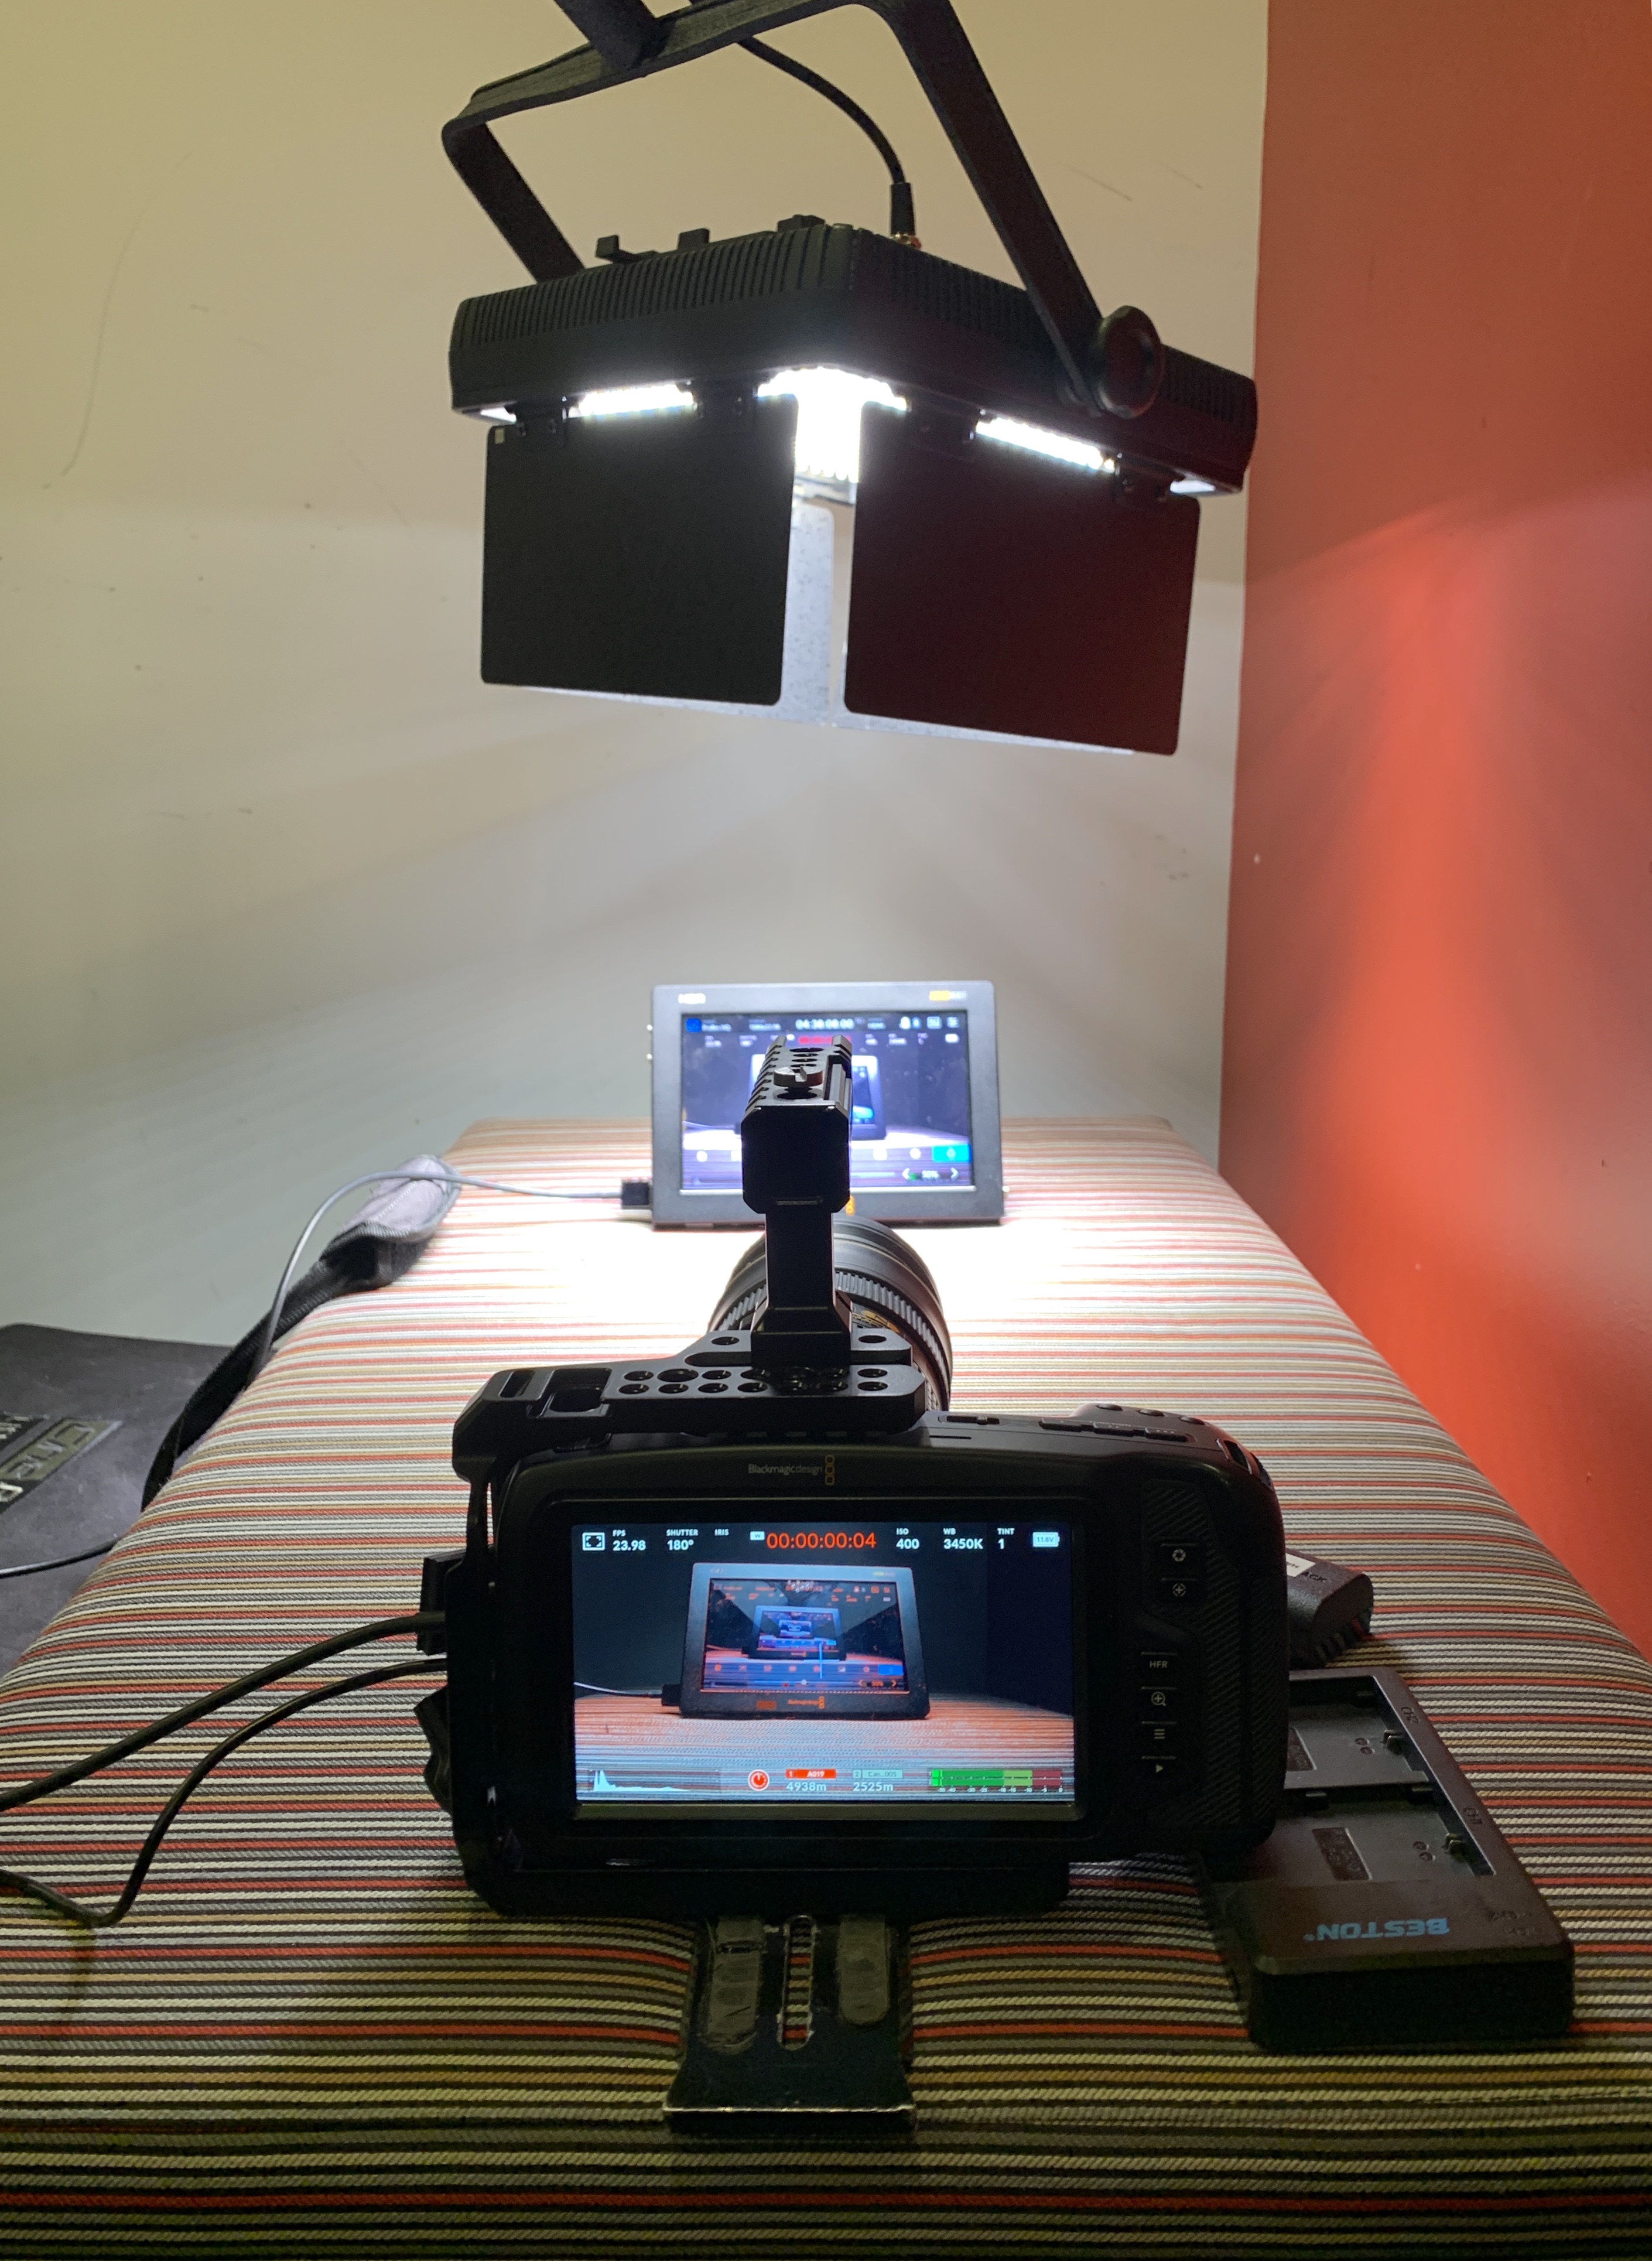 The New Blackmagic Design 12G 7-Inch Video Assist 4K Review